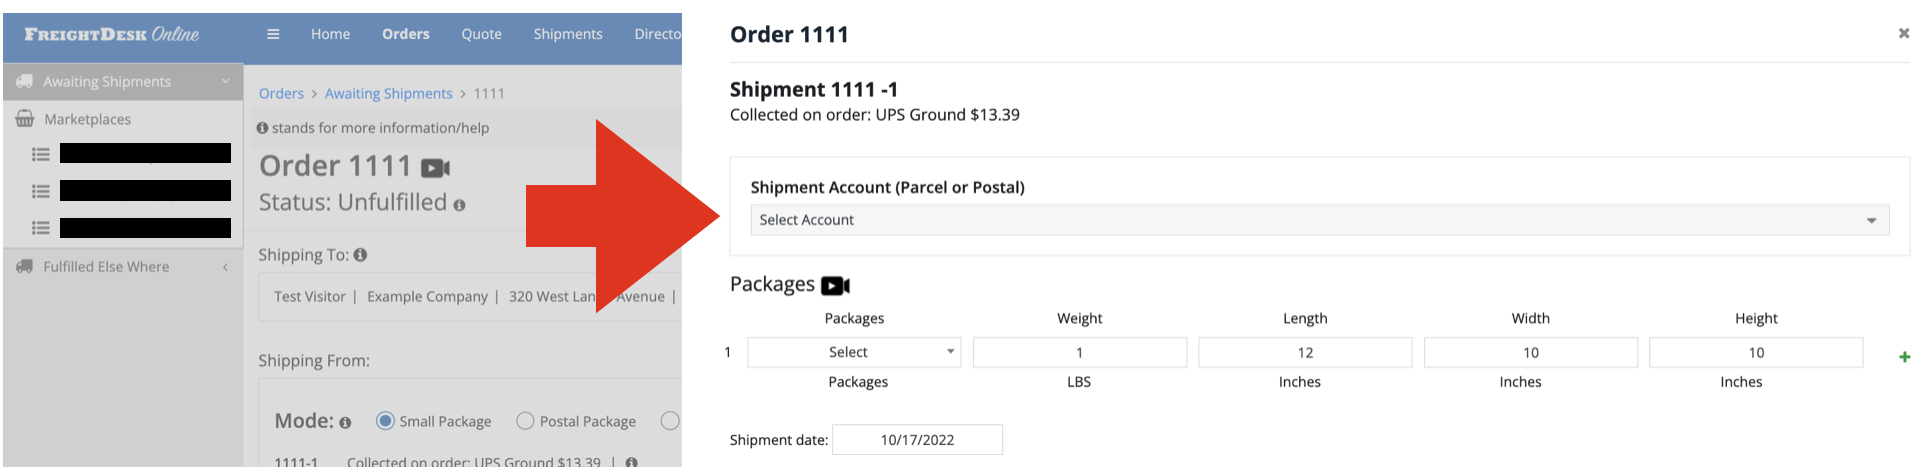 Select Bill-to Account in FreightDesk Online